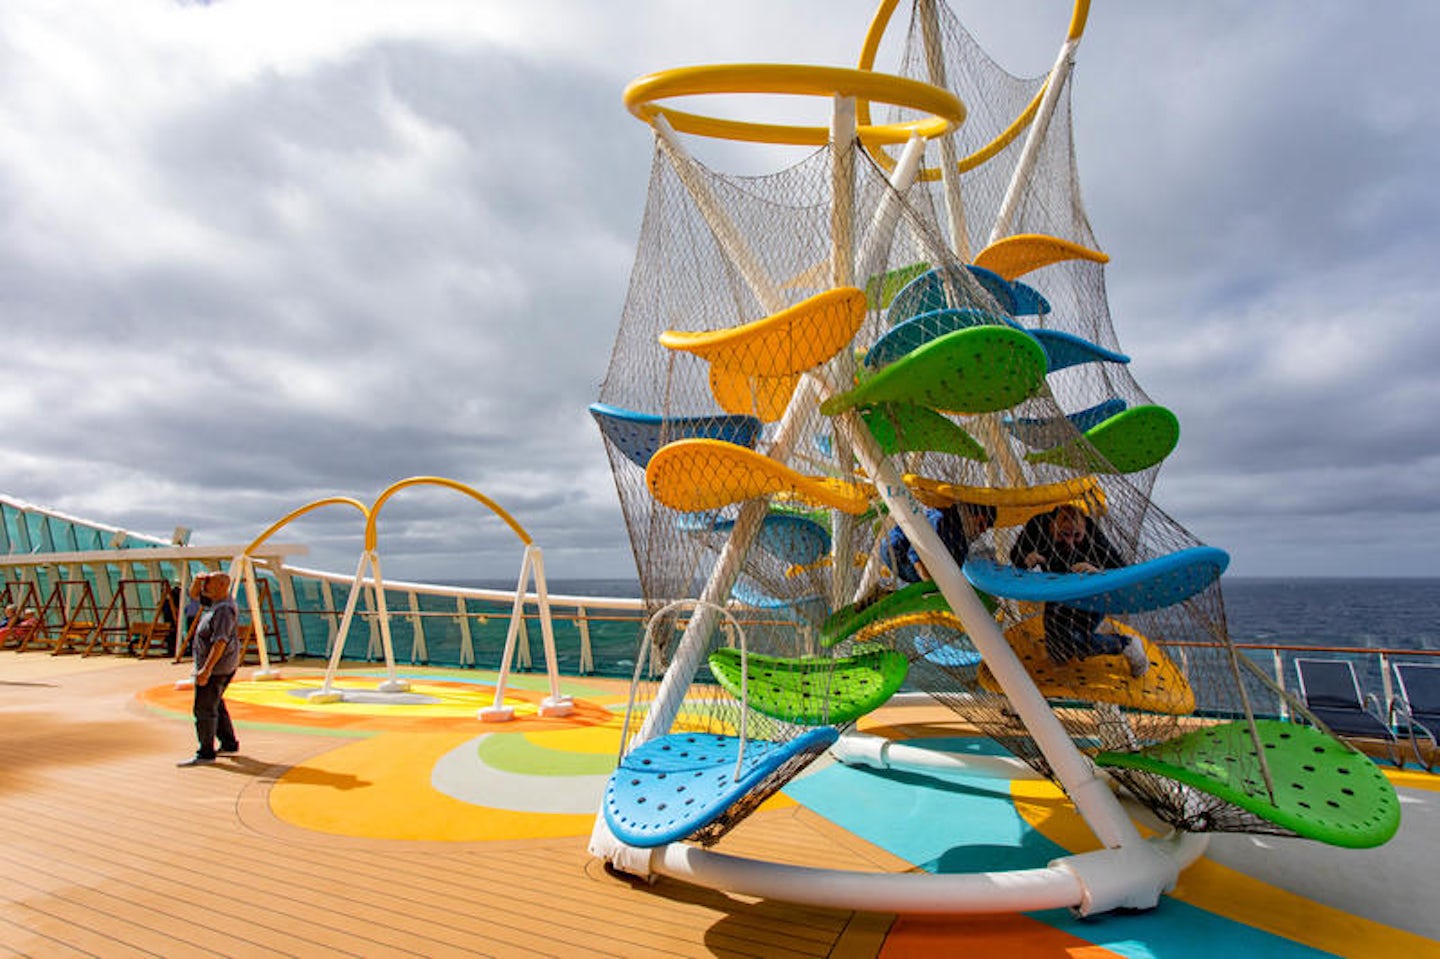 Sky Climber on Independence of the Seas